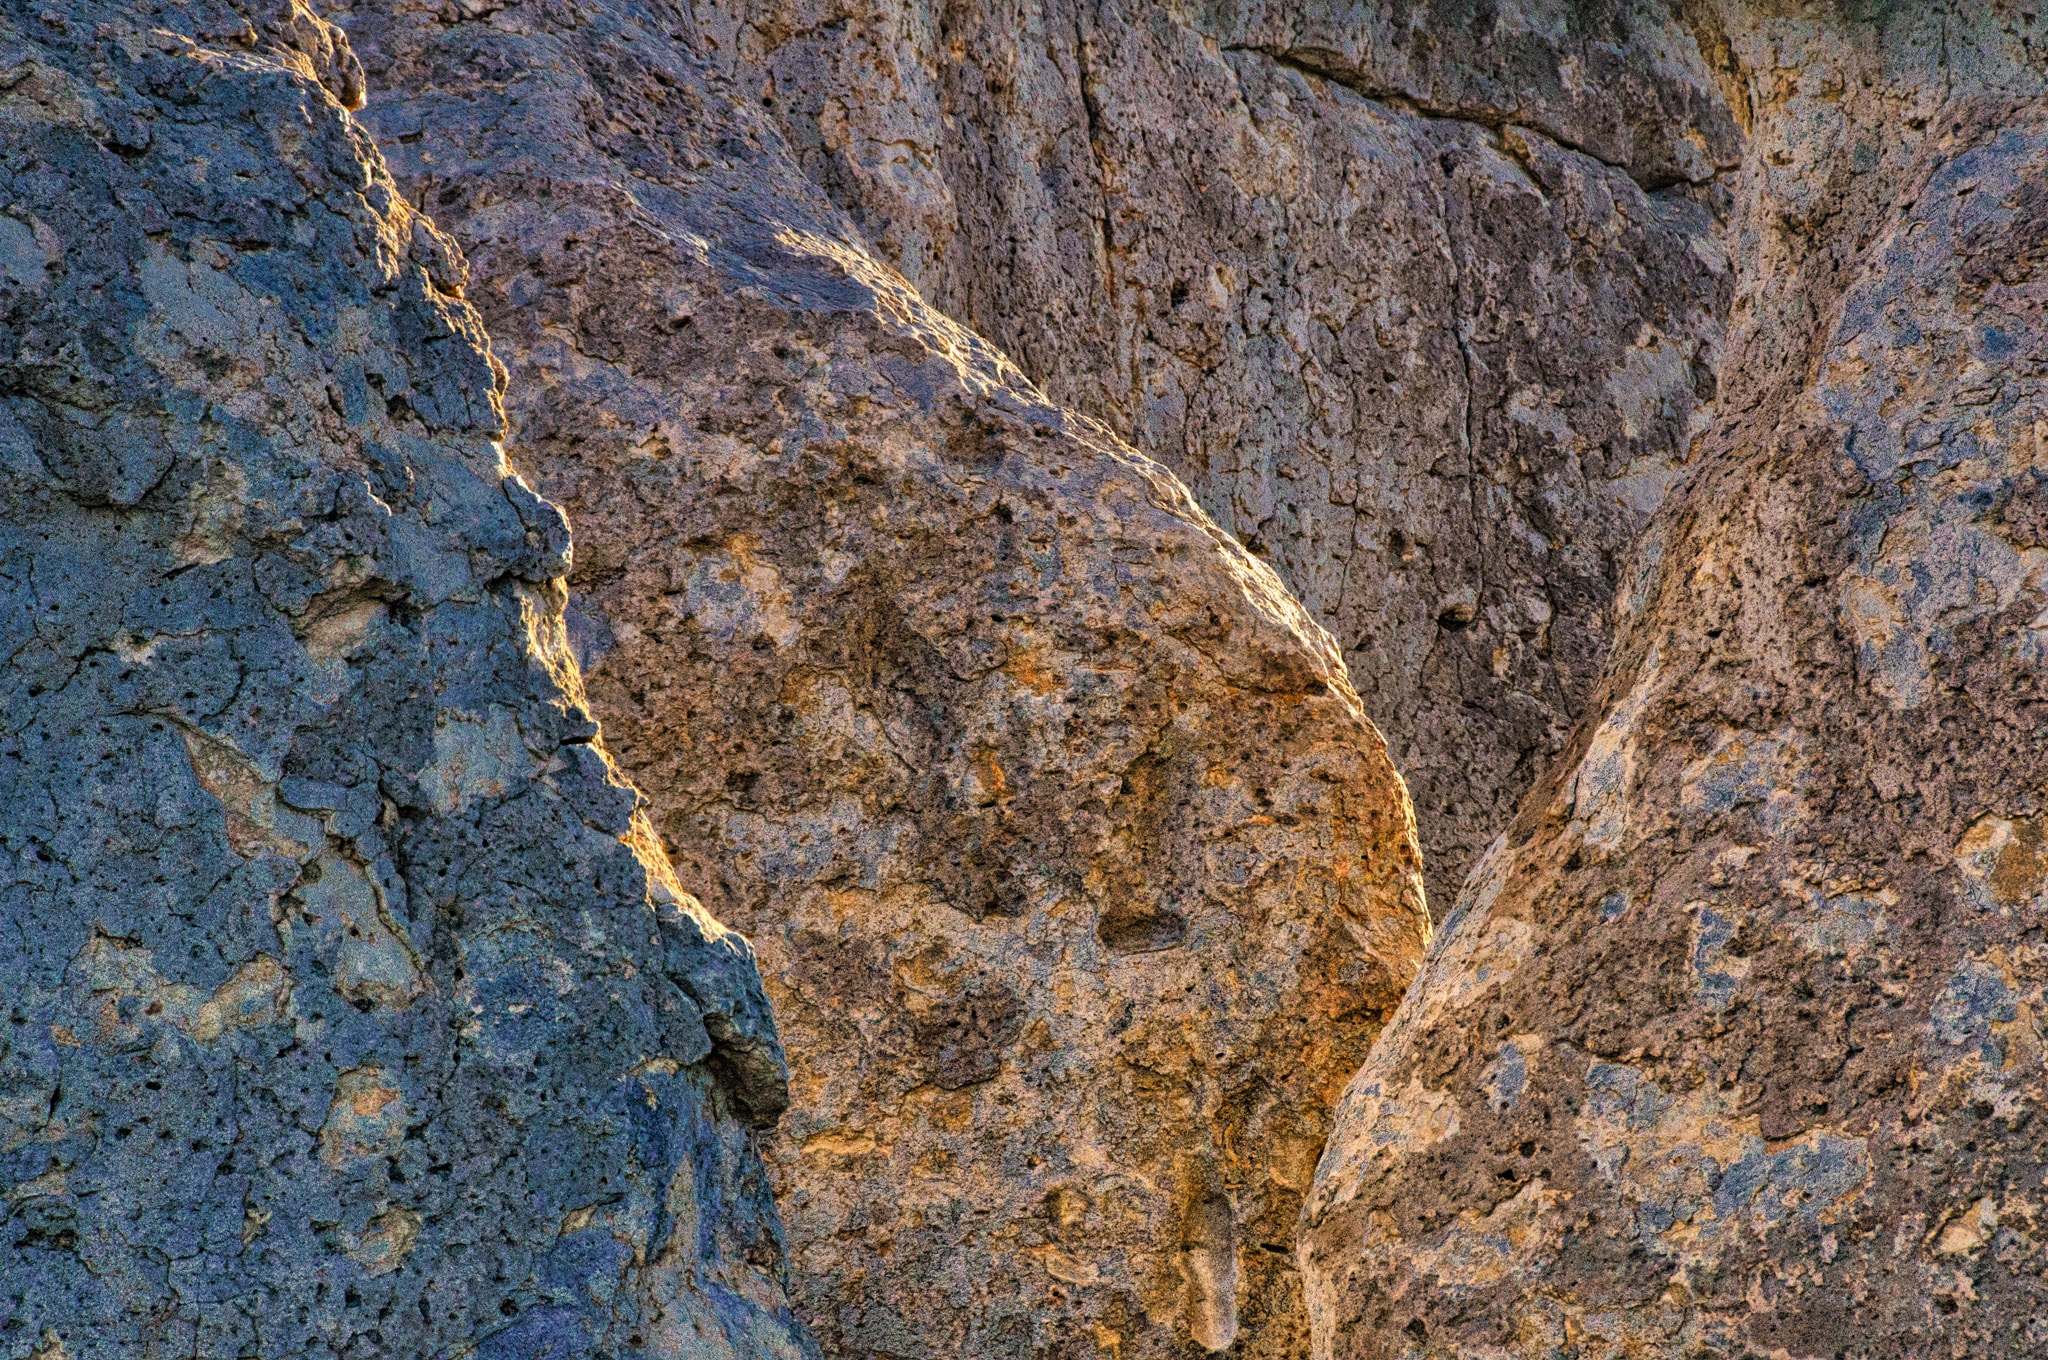 Subtle variations in the color of the Kneeling Nun Tuff are highlighted in this late afternoon closeup of overlapping fins and pinnacles in City of Rocks State Park, New Mexico.